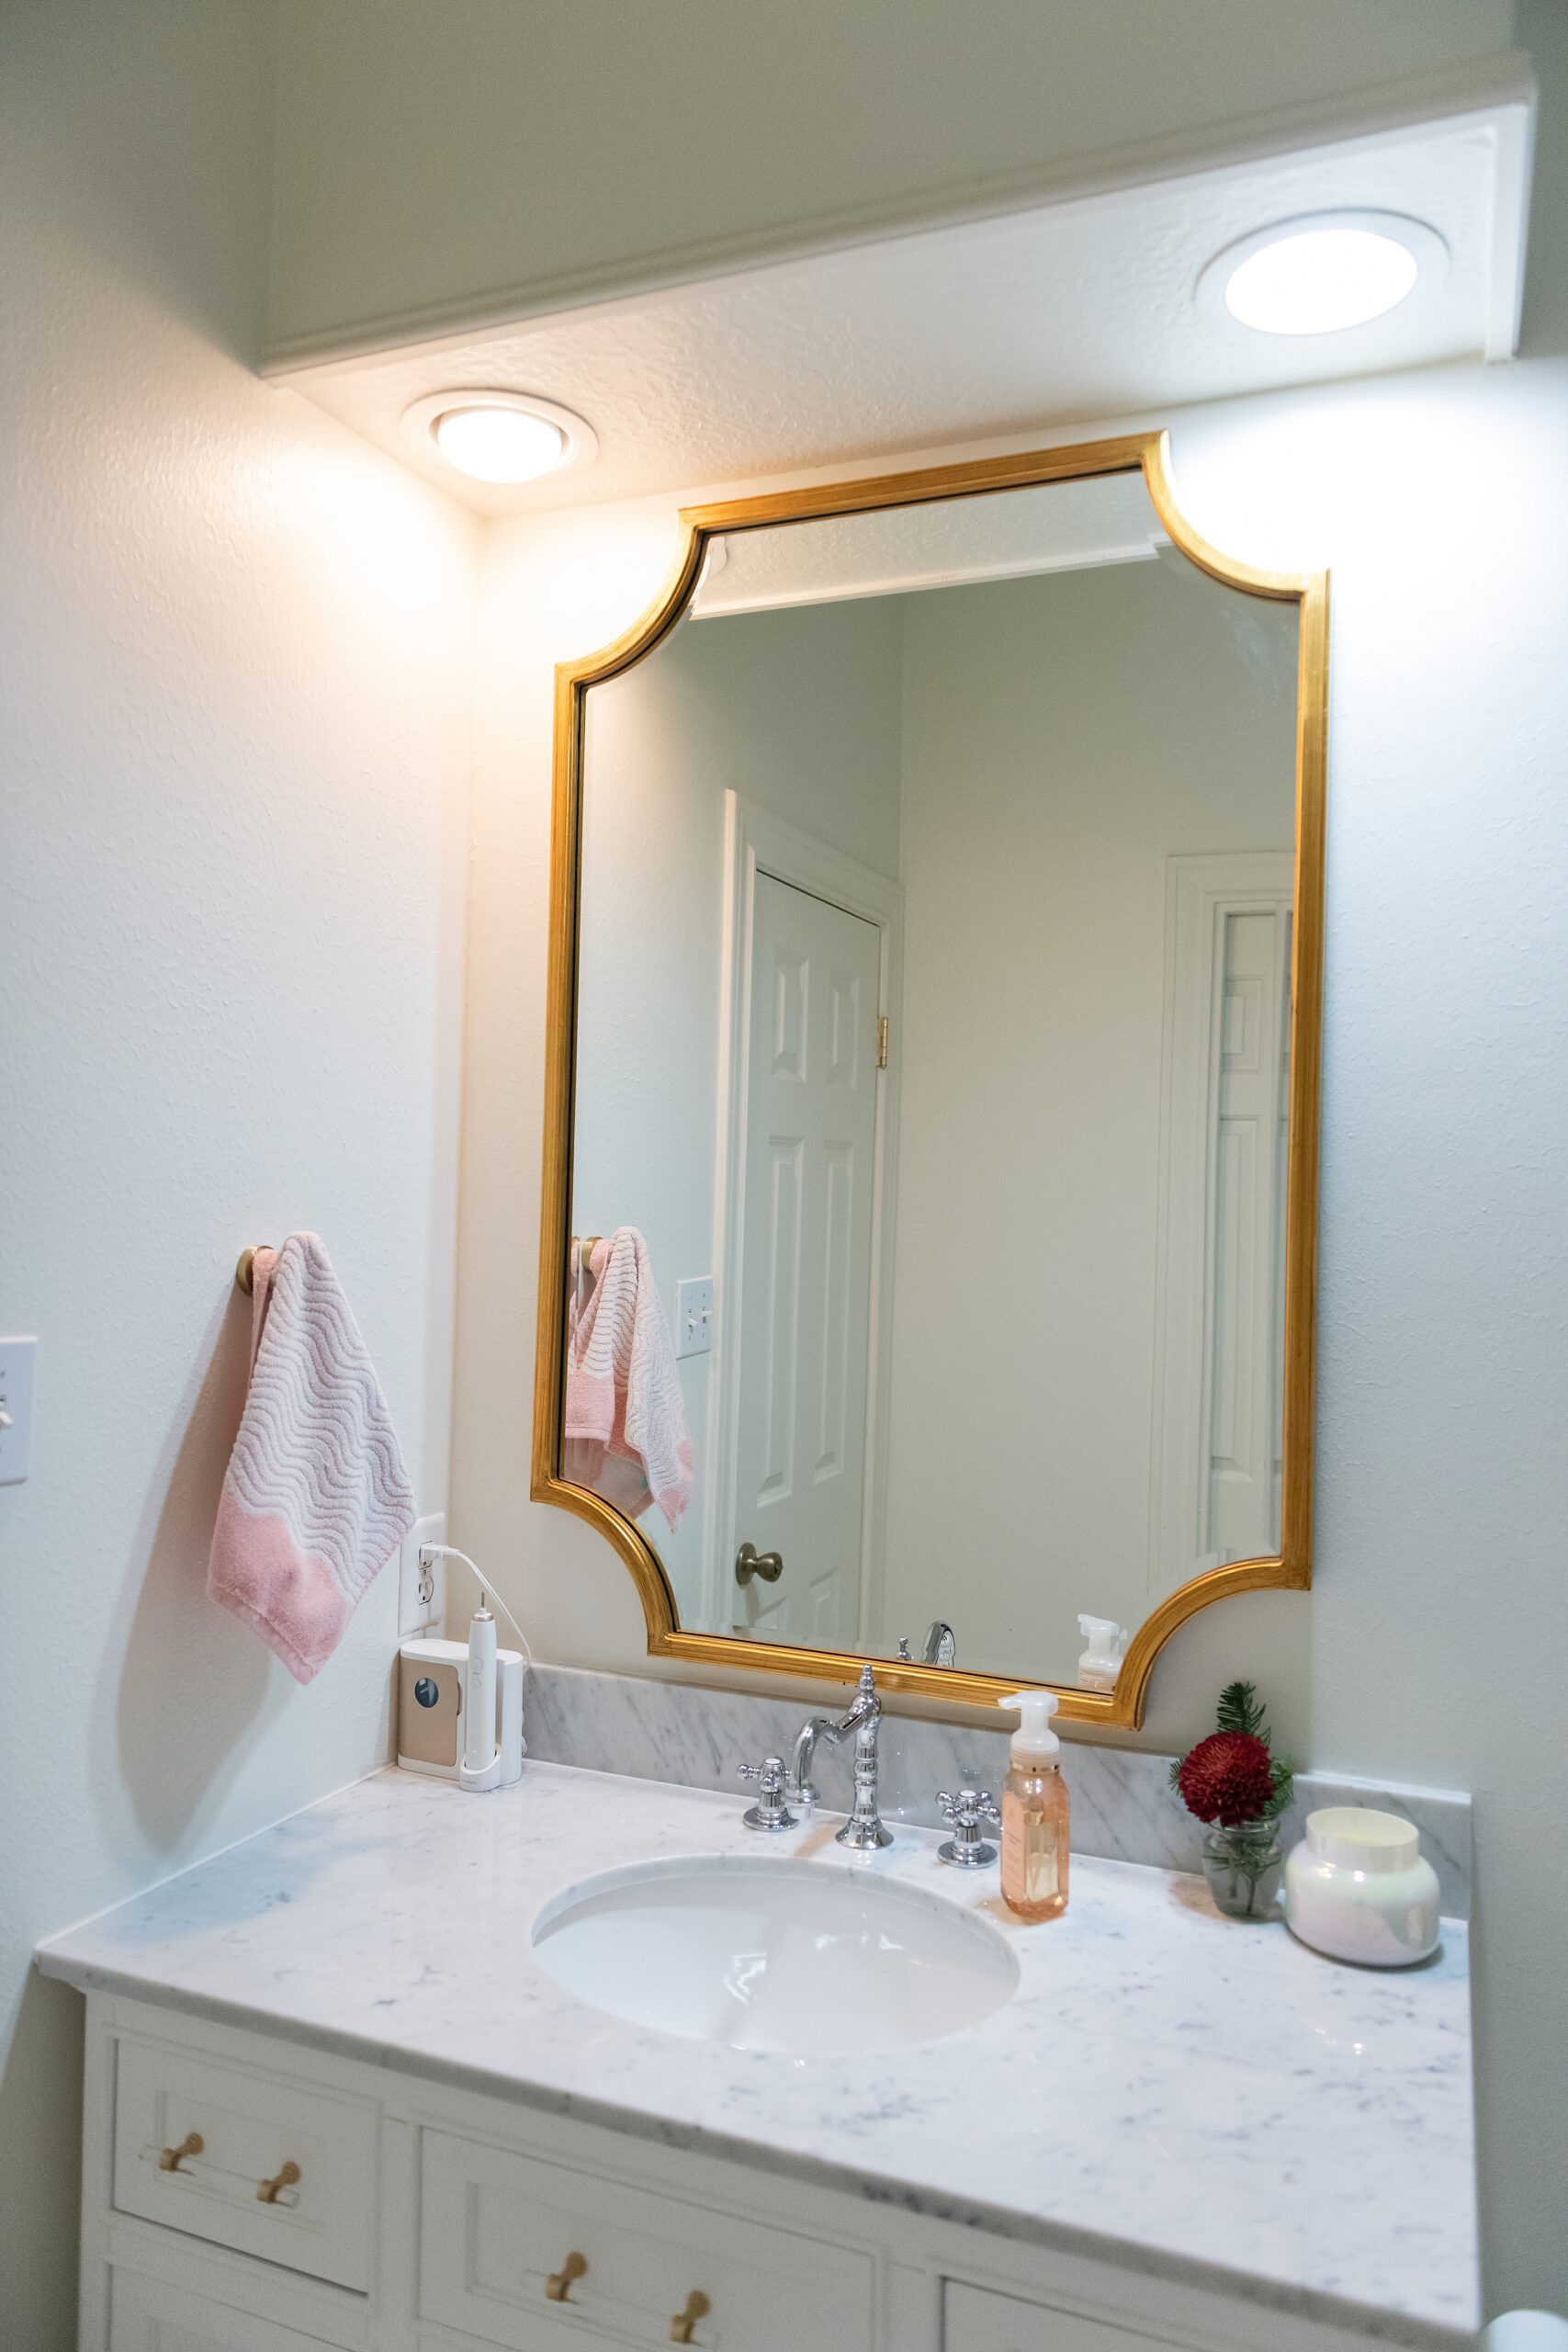 Girls Bathroom by popular Houston life and style blog, Fancy Ashley: image of a bathroom with pink and grey tile, white vanity with marble counter top and gold drawer pulls, and gold frame mirror. 